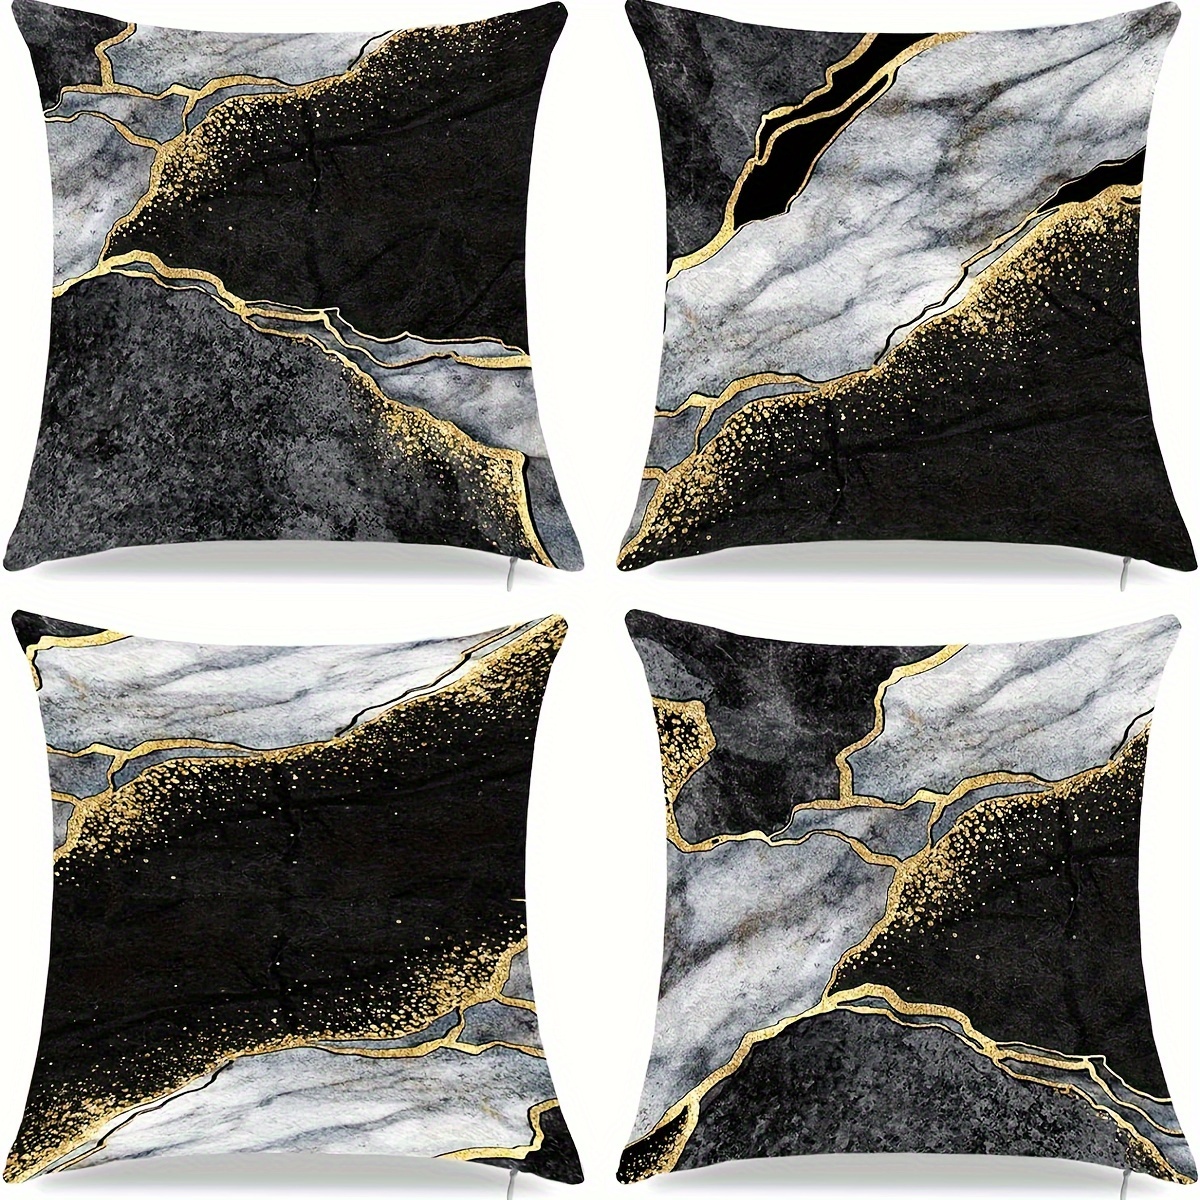 

4pcs Black And Gold Marble Throw Pillow Covers Black Grey Abstract Home Decor Cushion Covers Sofa Living Room Farmhouse Decorative Pillowcase Set Of 4